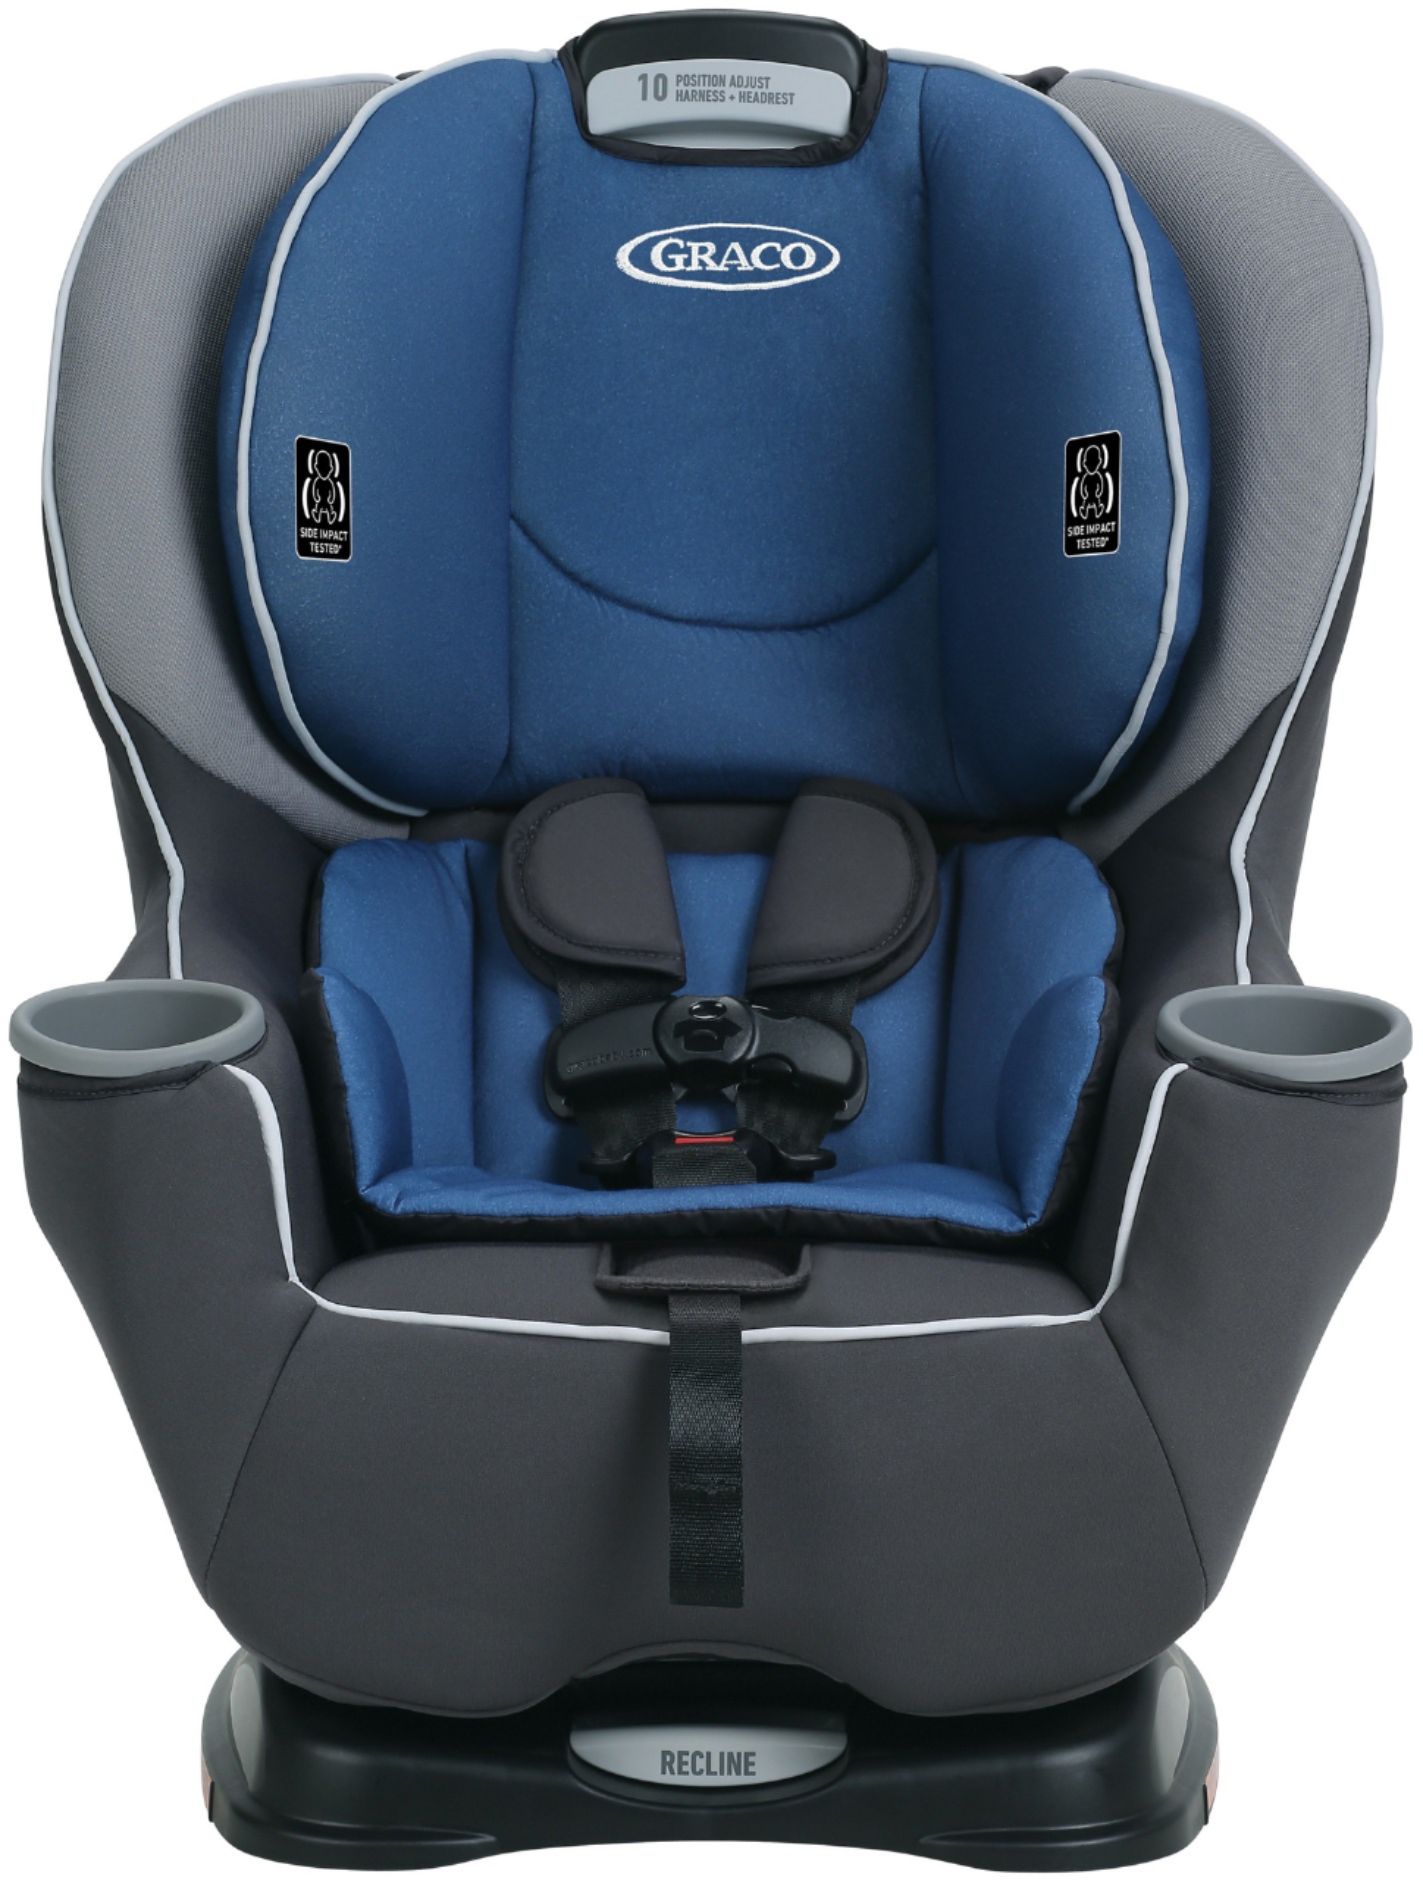 graco sequence 65